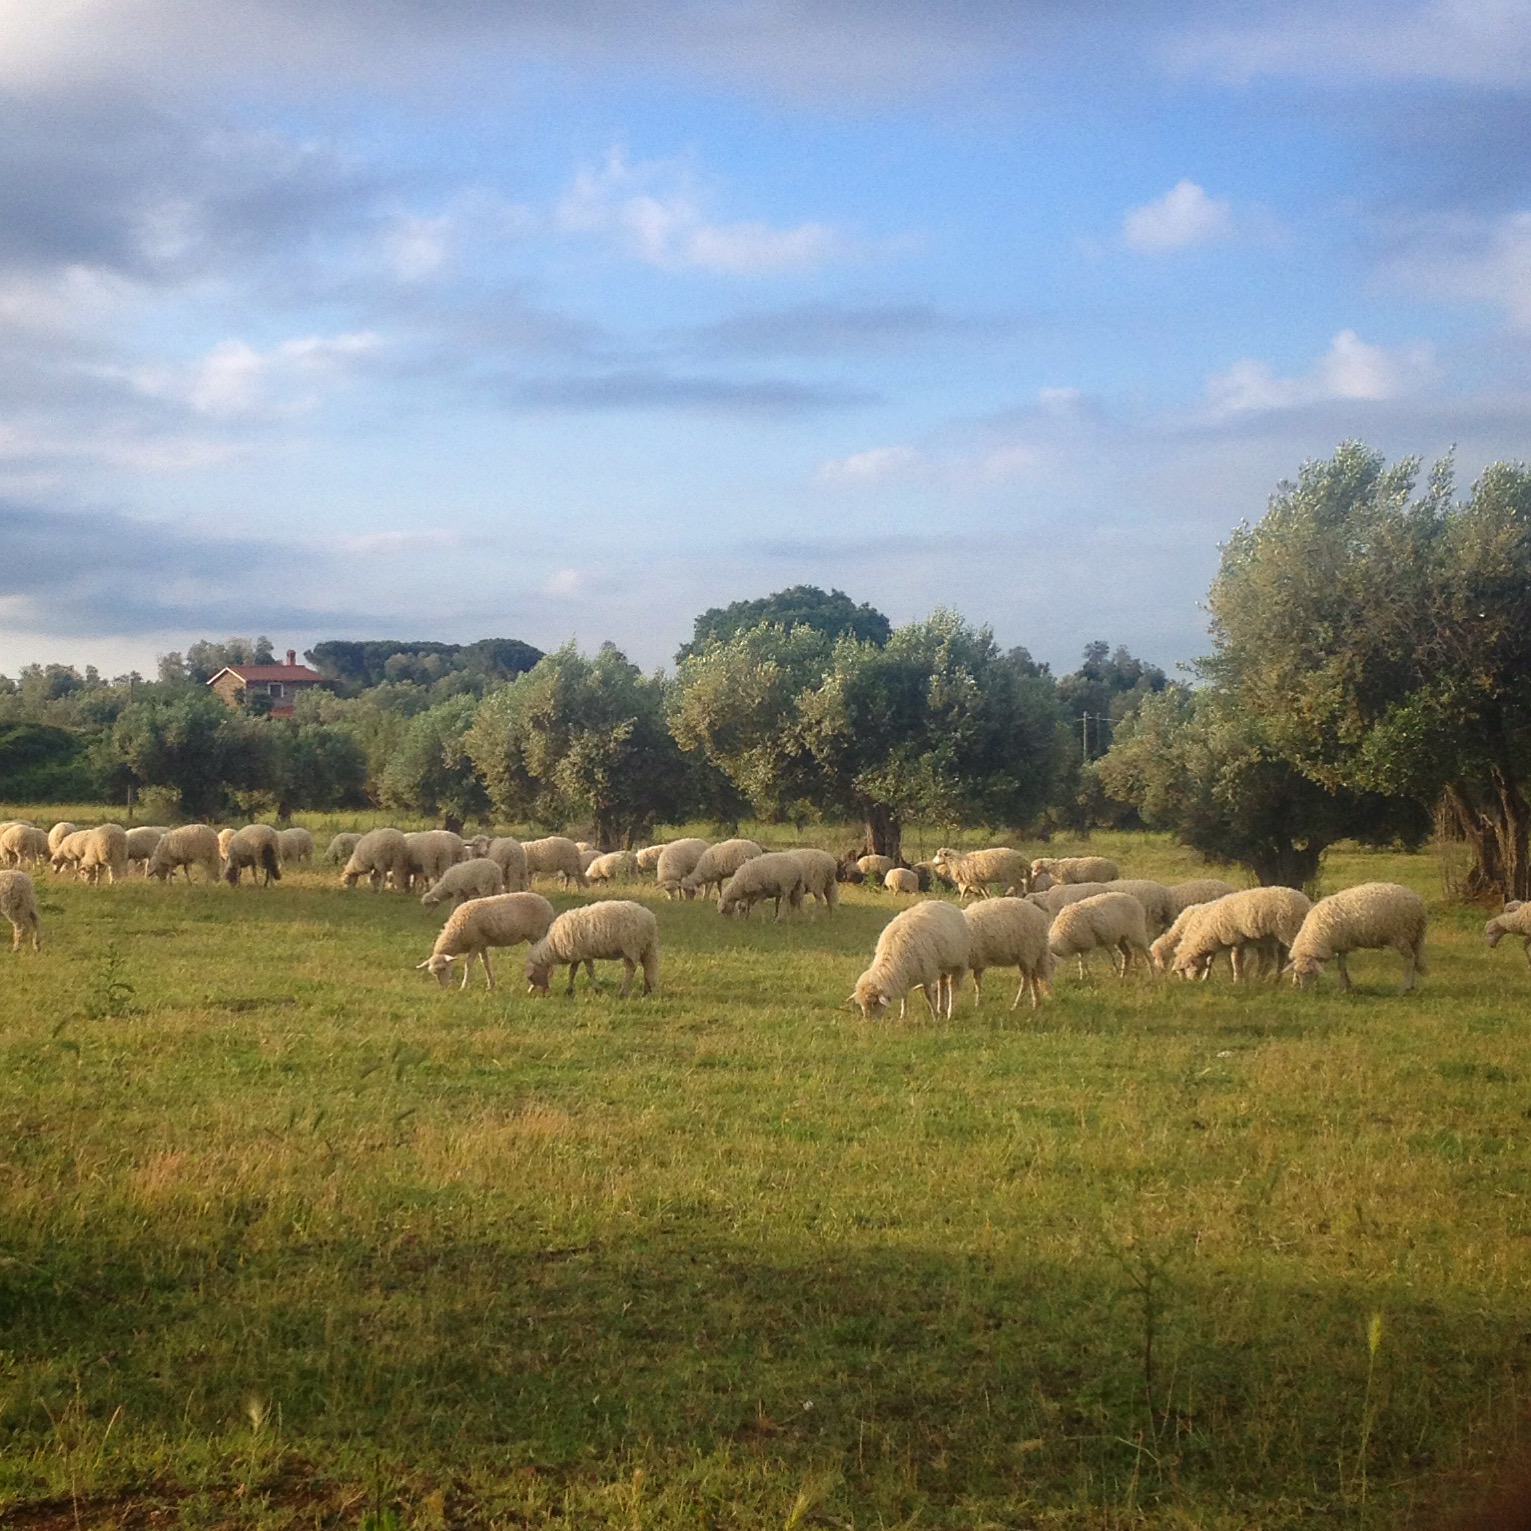 Sheep grazing in a suburban olive grove near Cerveteri, photo by Angela Trentacoste